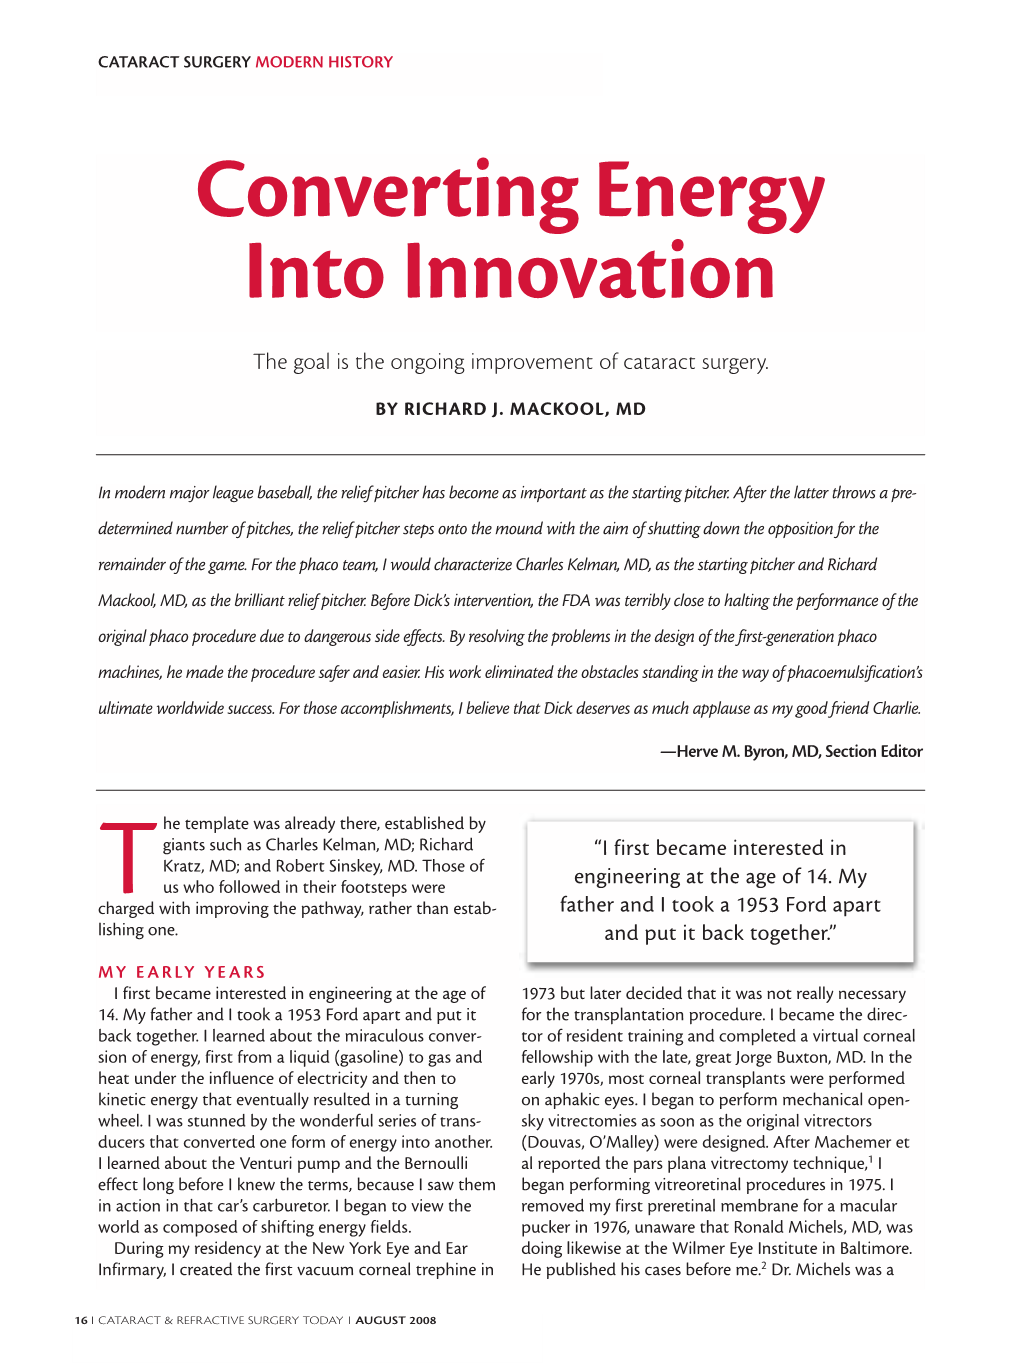 Converting Energy Into Innovation